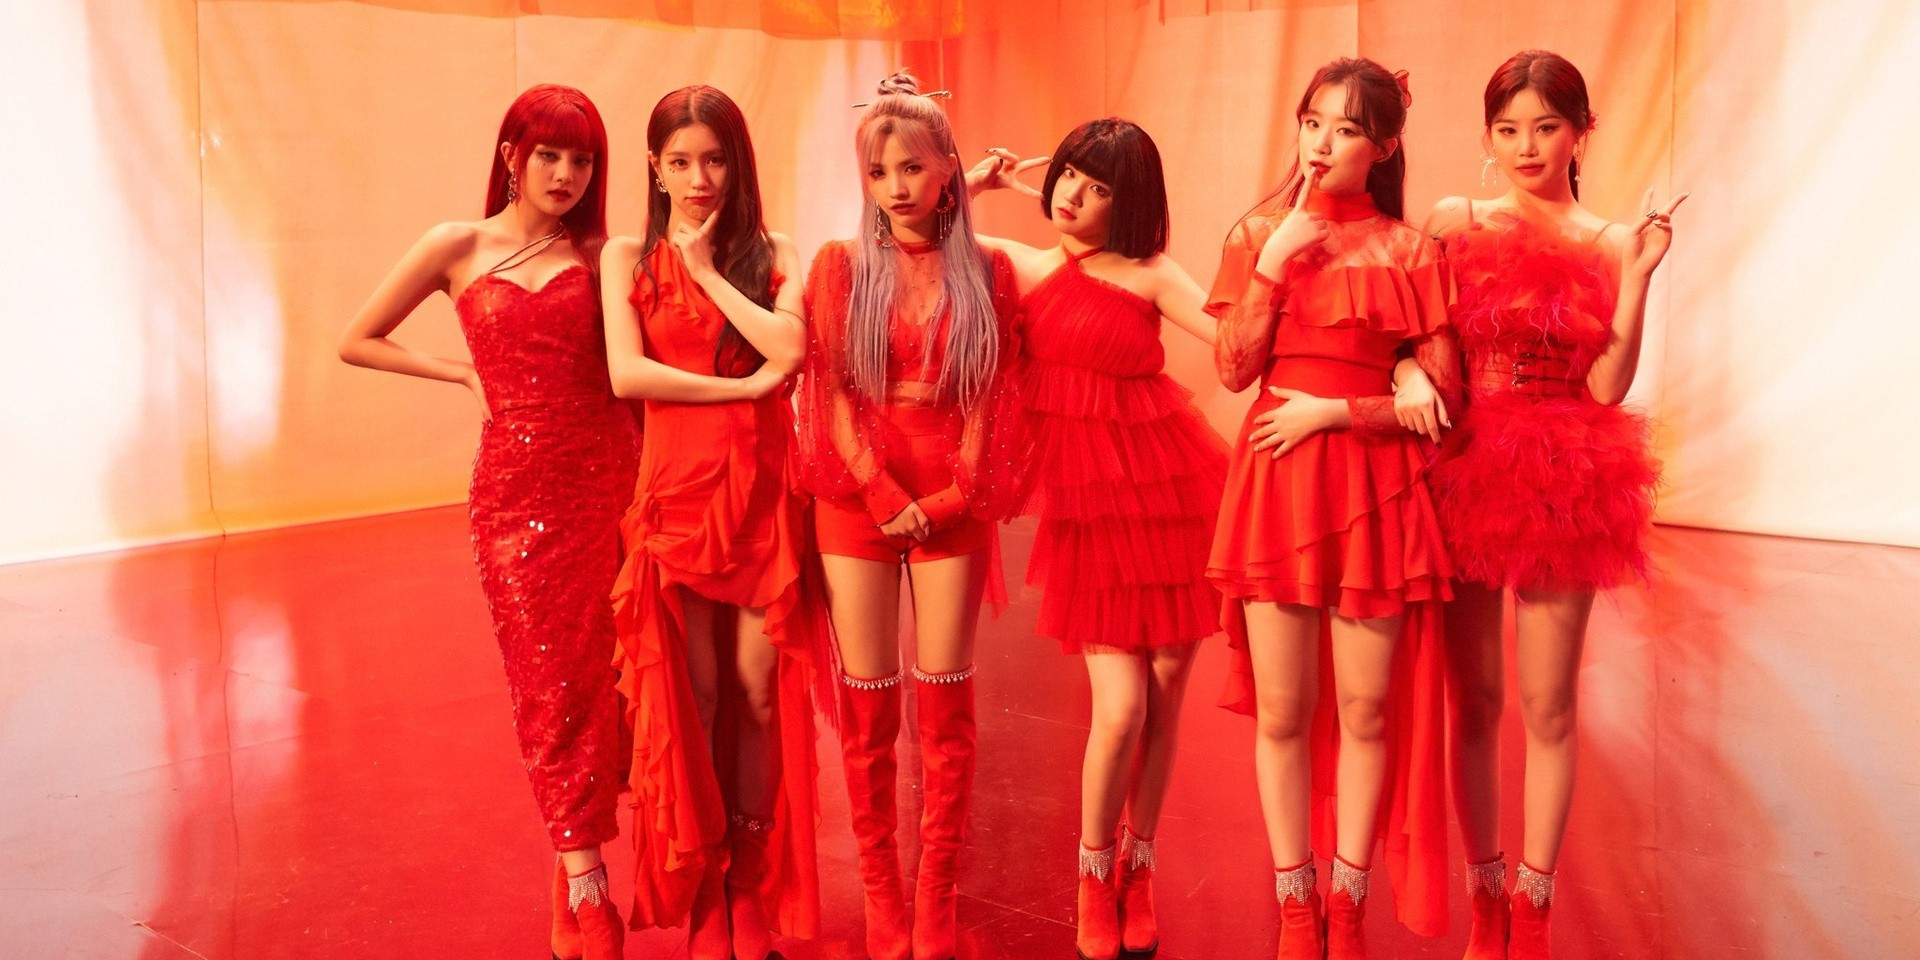 (G)I-DLE enlist Dimitri Vegas & Like Mike for 'HWAA' remix – watch